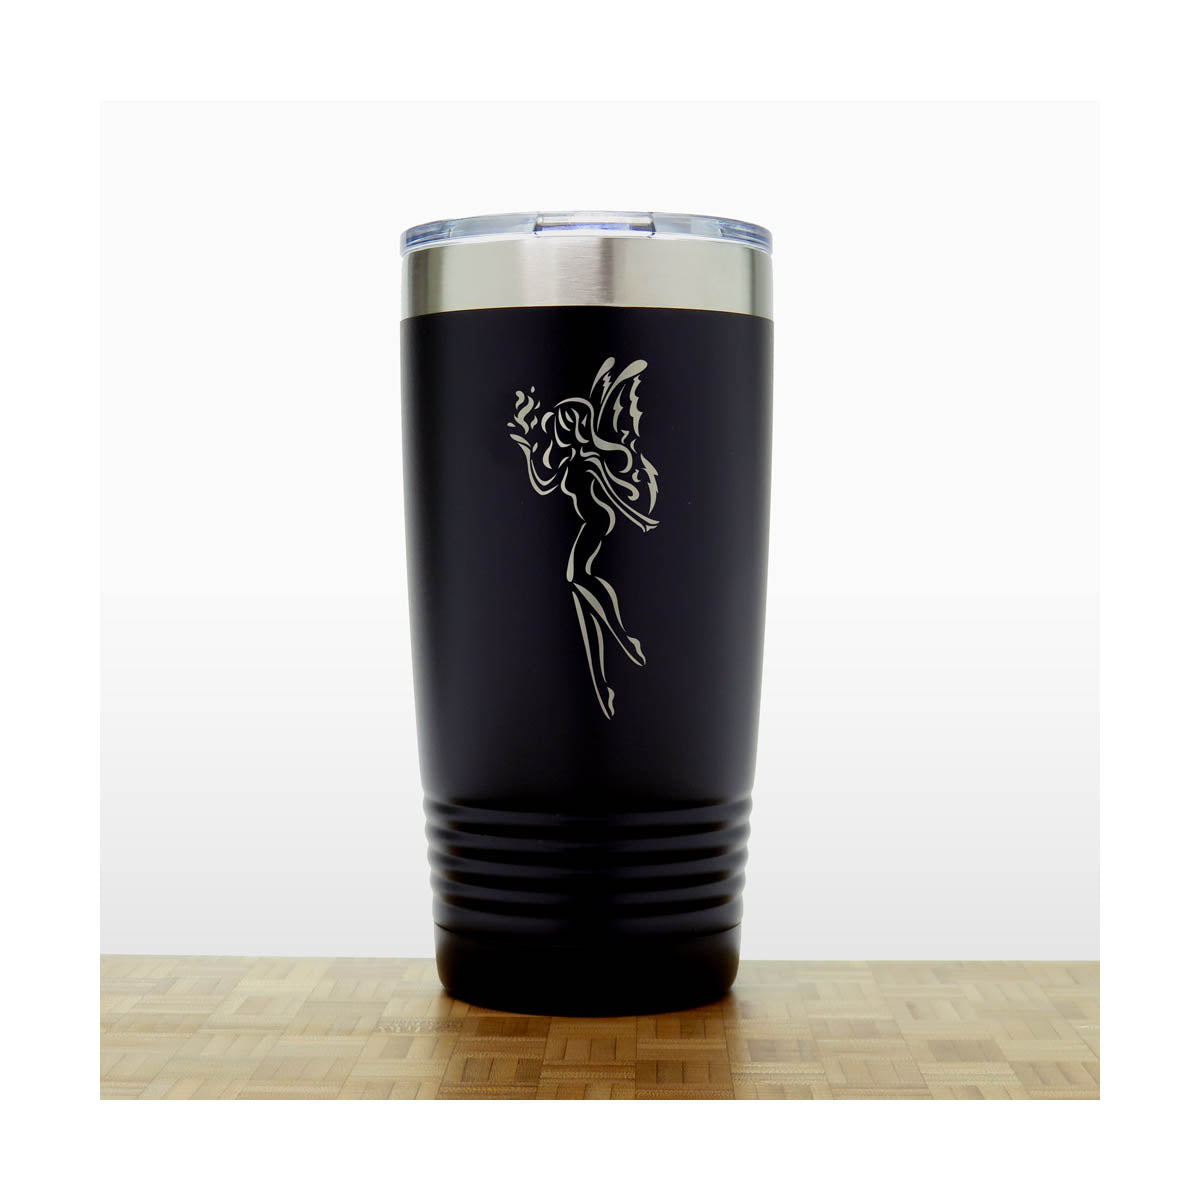 Black - Fairy 20 oz Insulated Tumbler - Design 3 - Copyright Hues in Glass